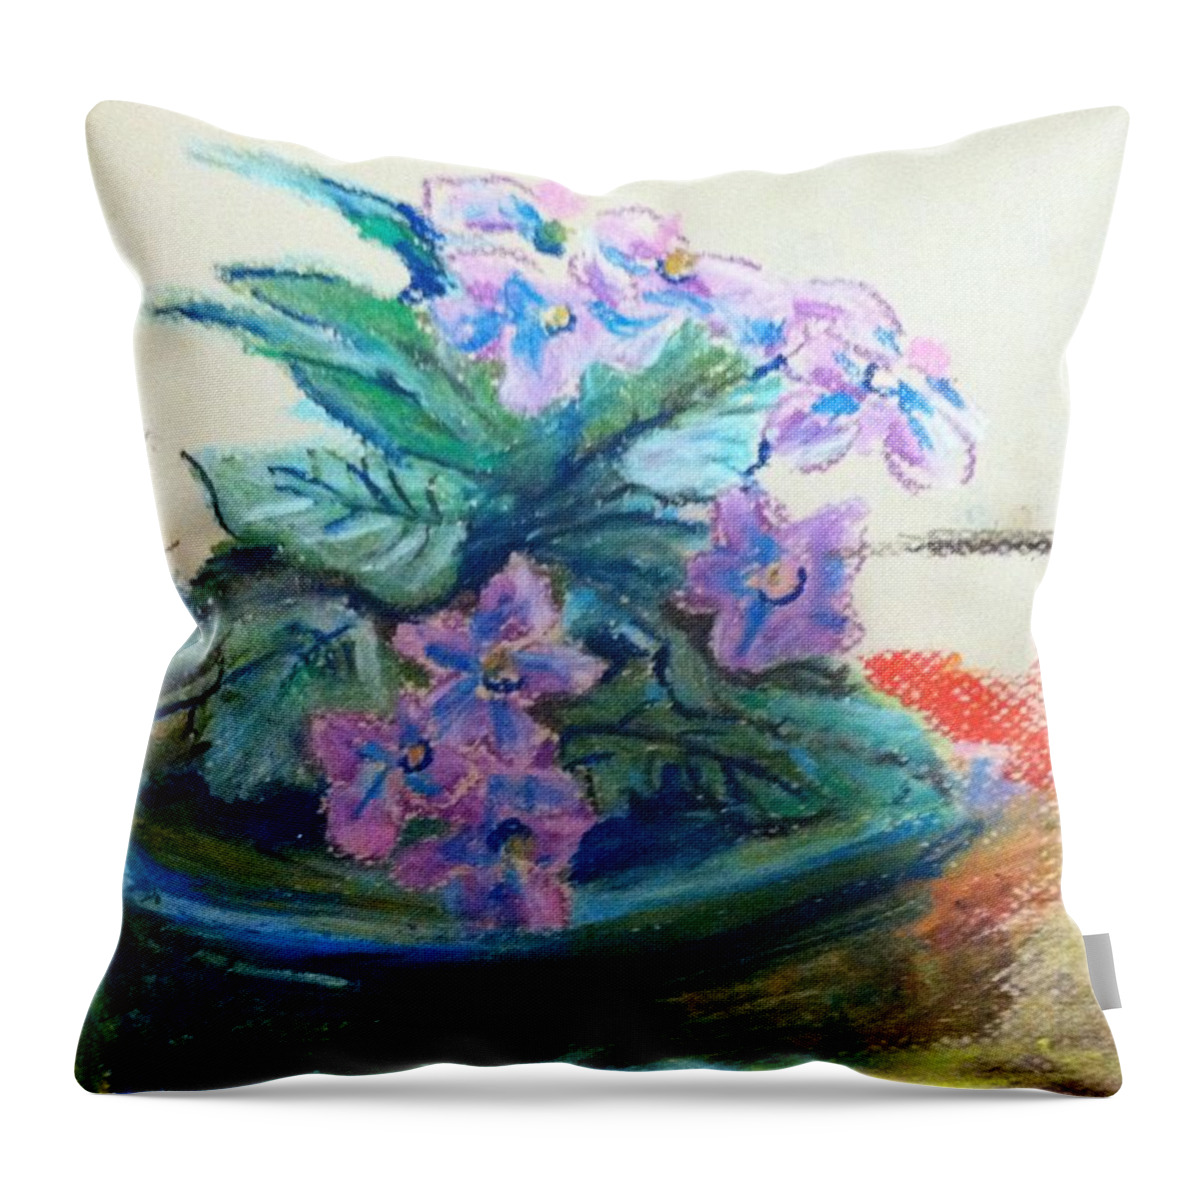  Throw Pillow featuring the painting African Violet by Hae Kim